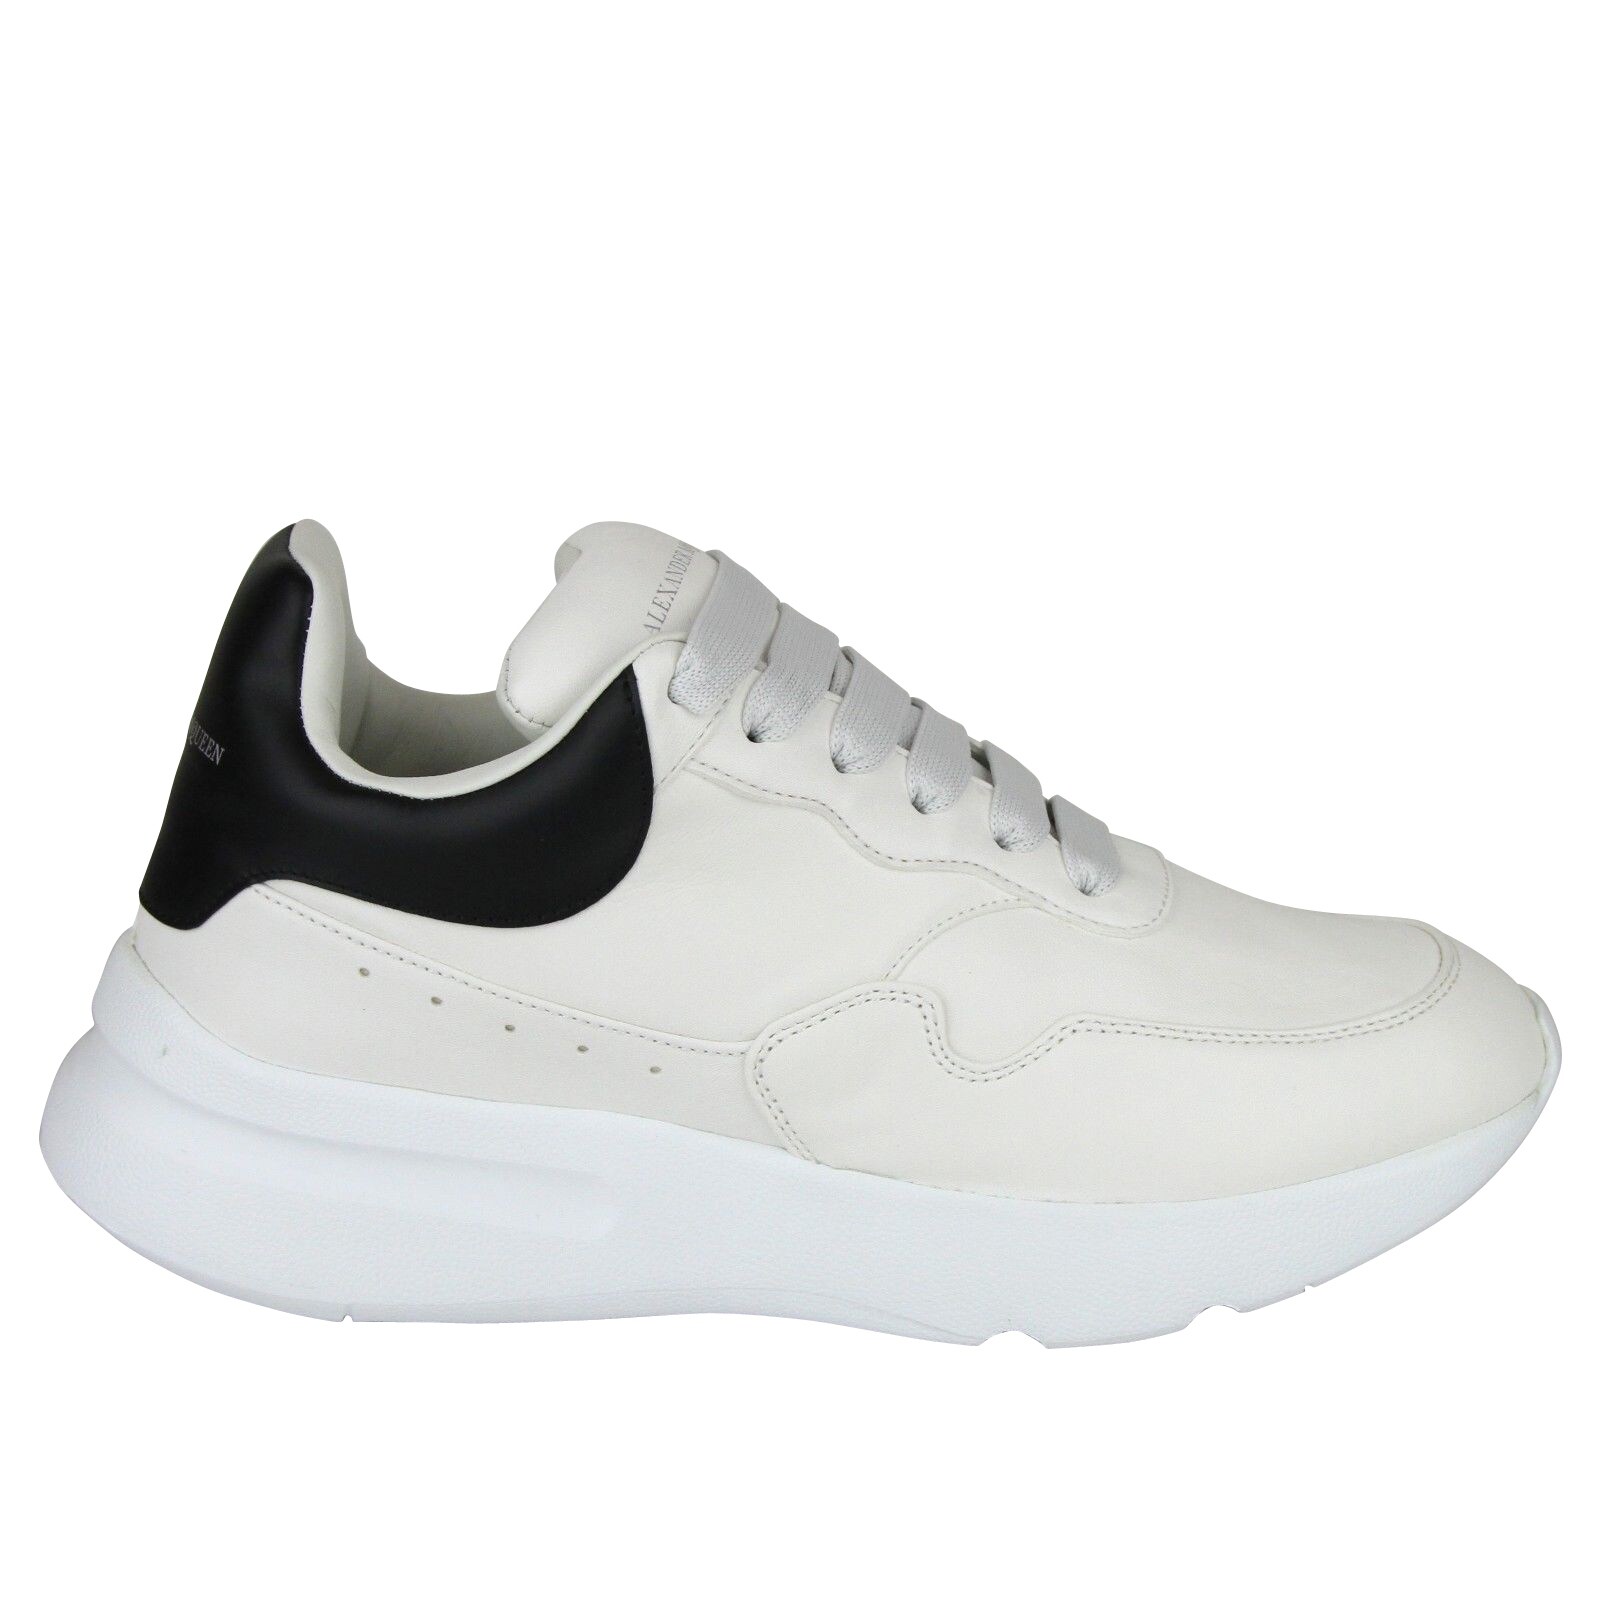 black leather running shoes mens